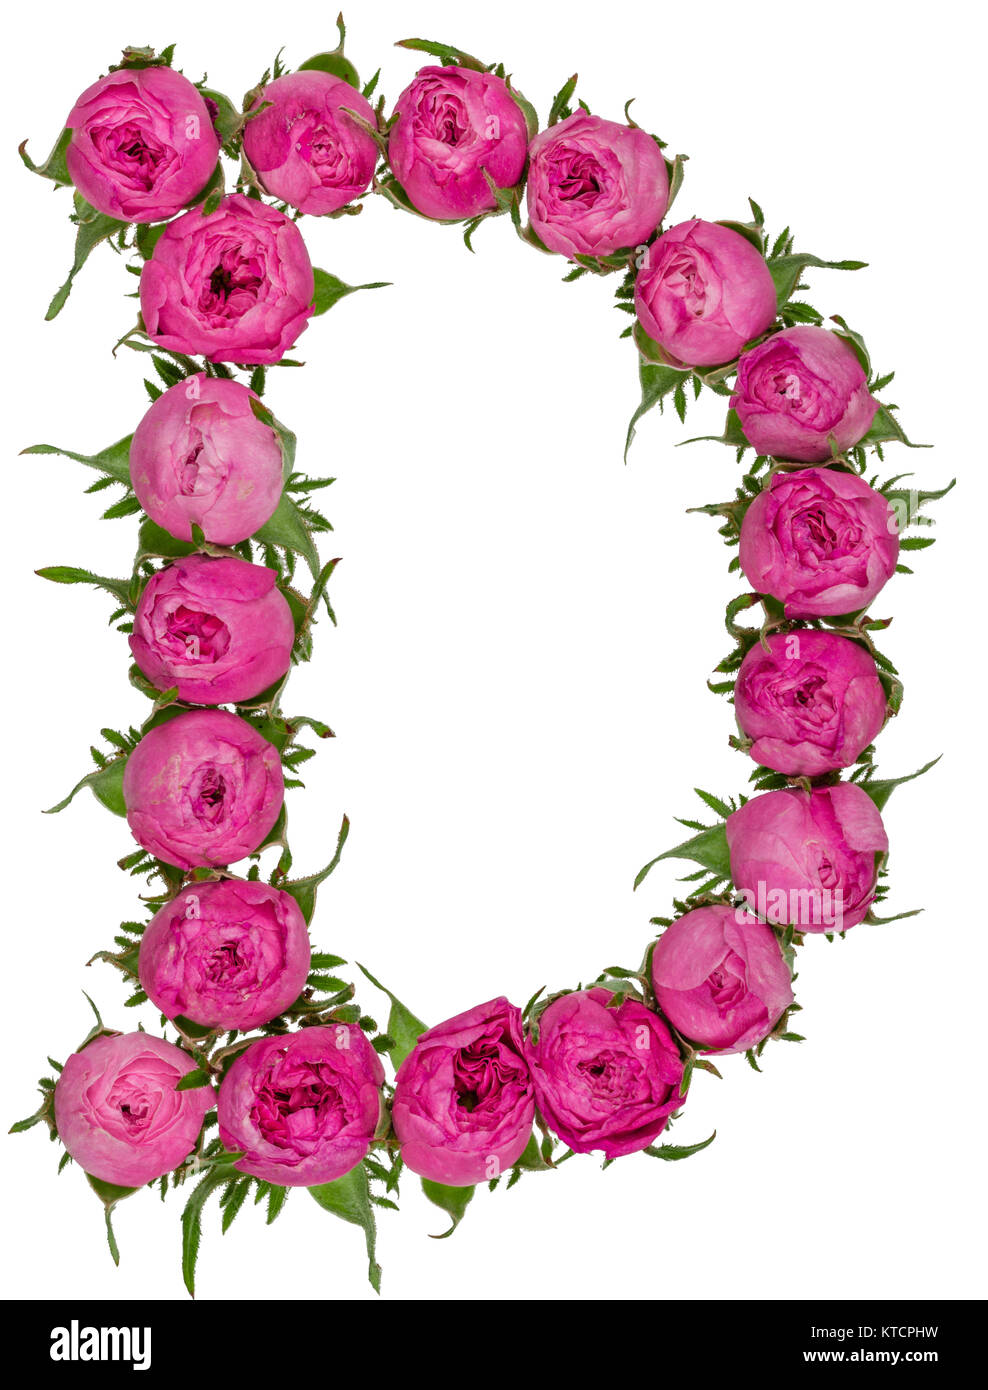 Letter D alphabet from flowers of roses, isolated on white background Stock Photo